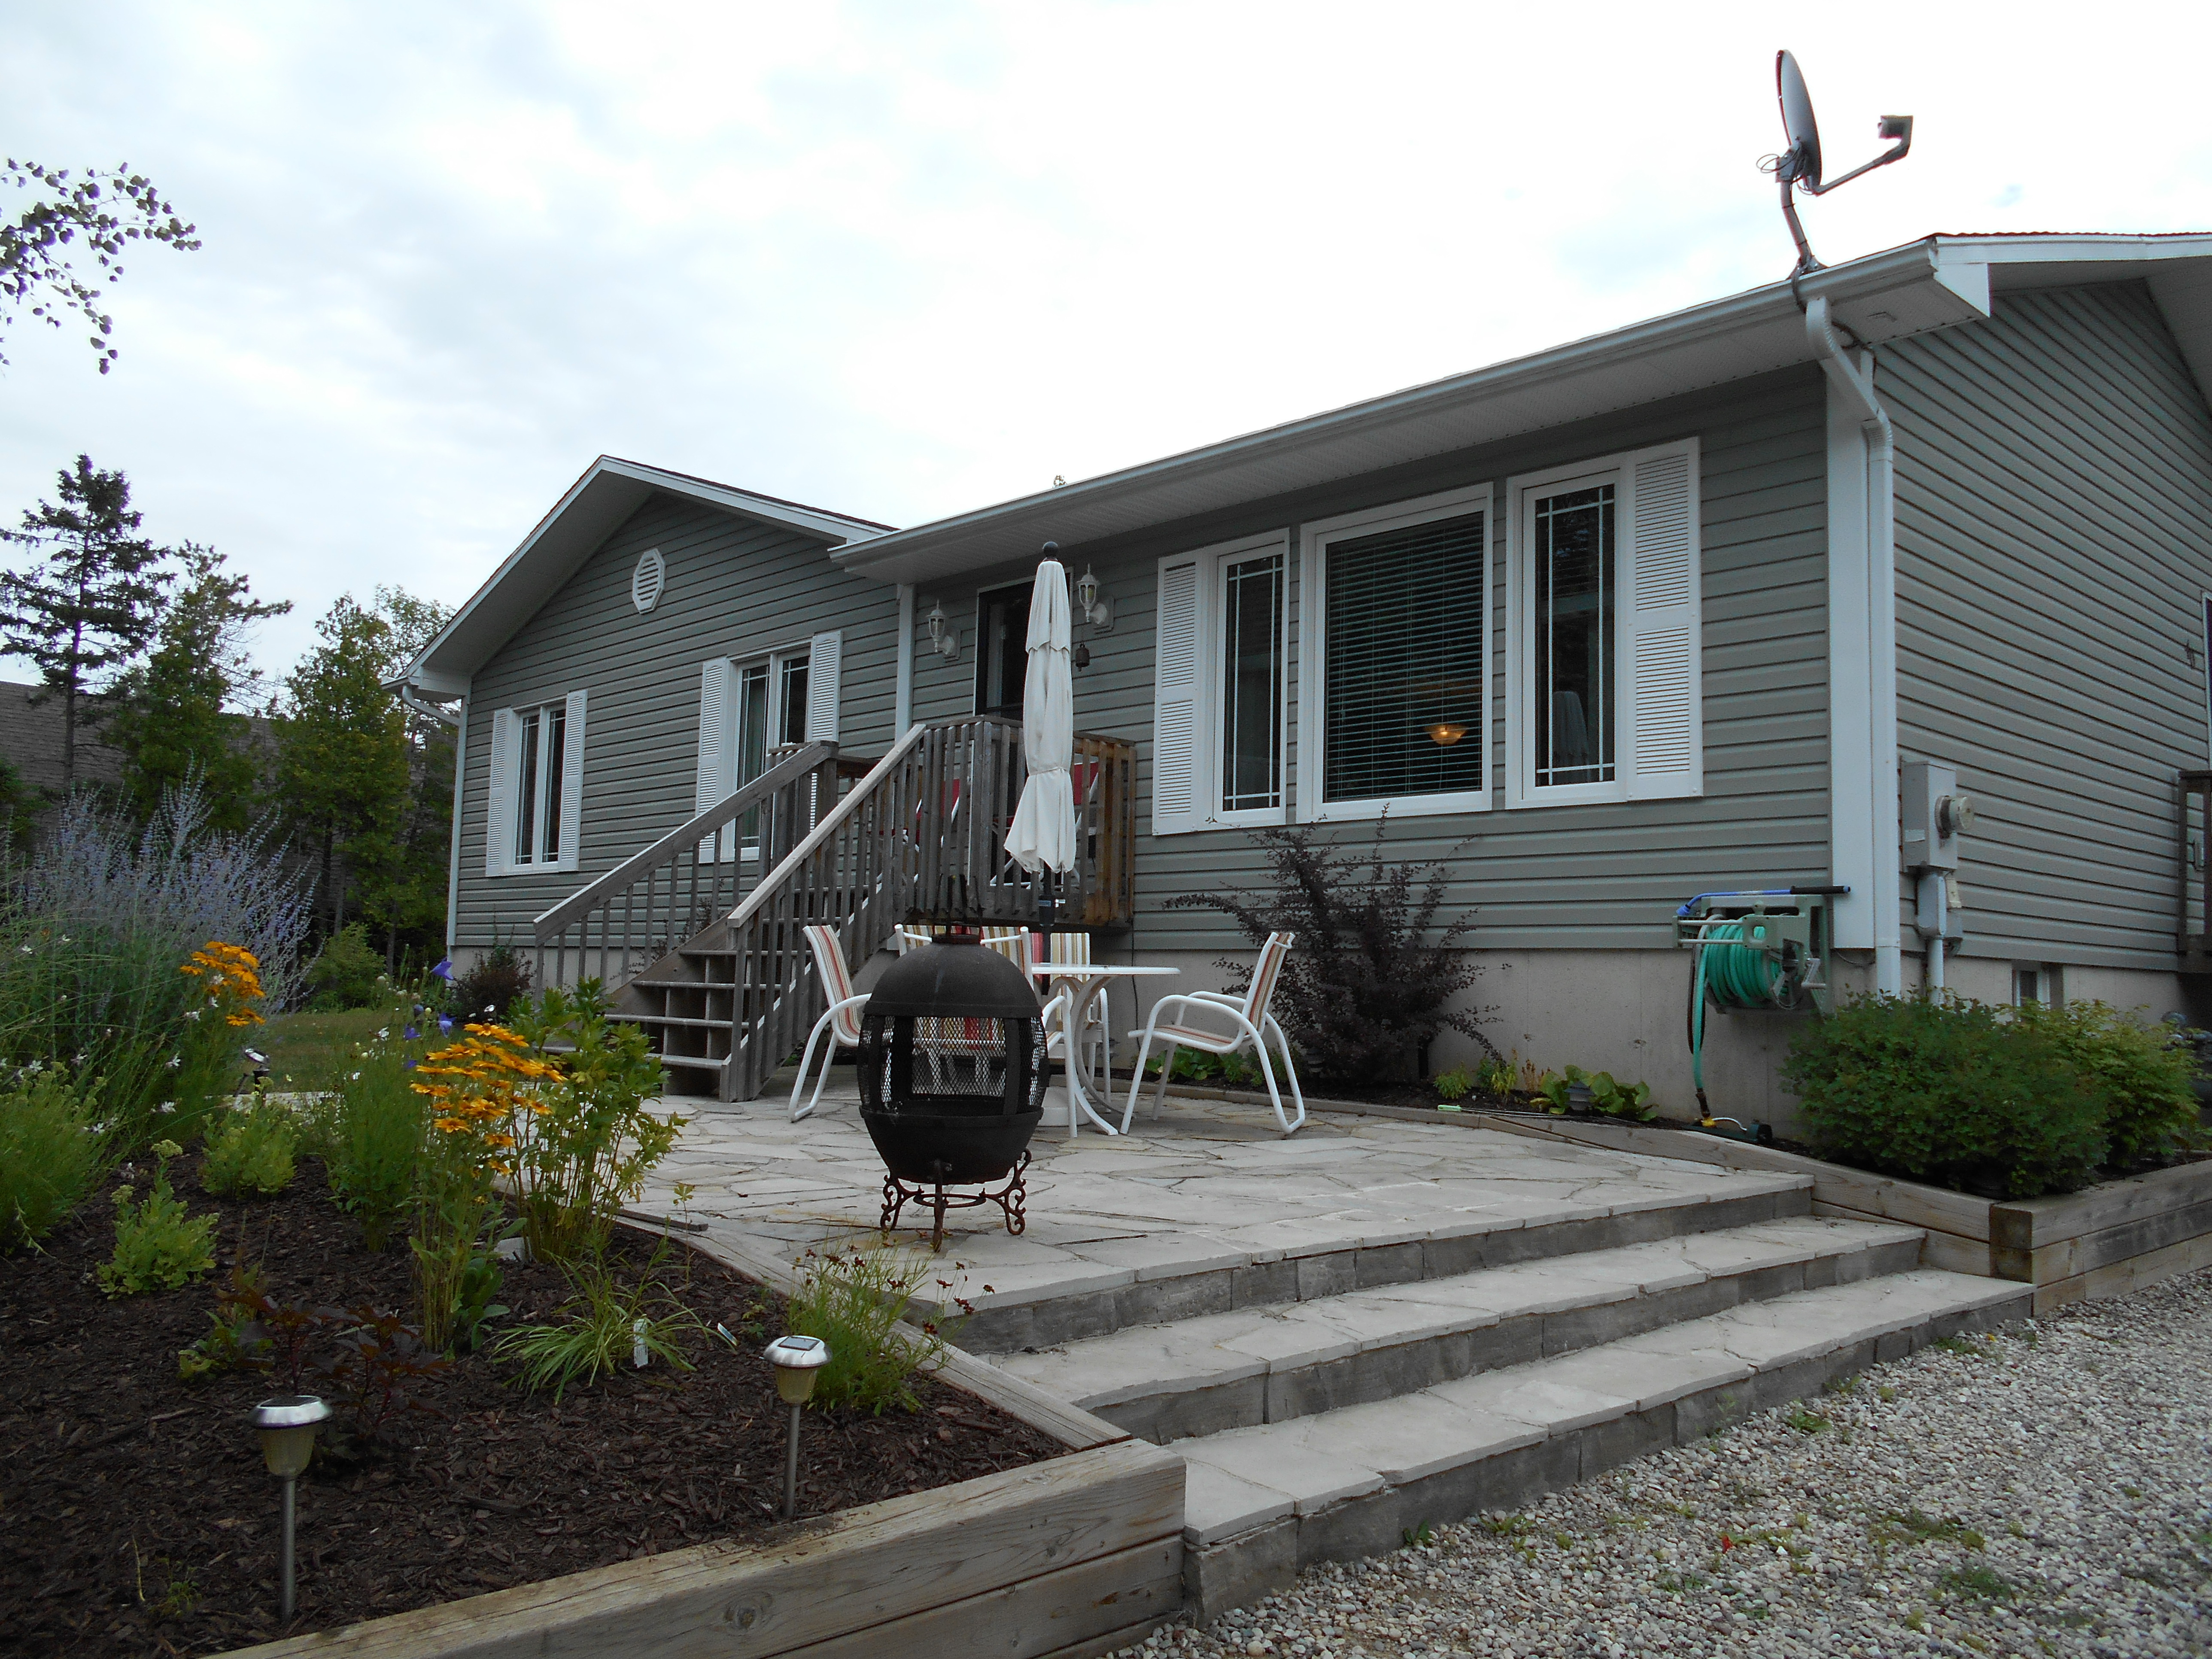 Kincardine News Classifieds For Rent Cottages For Rent In